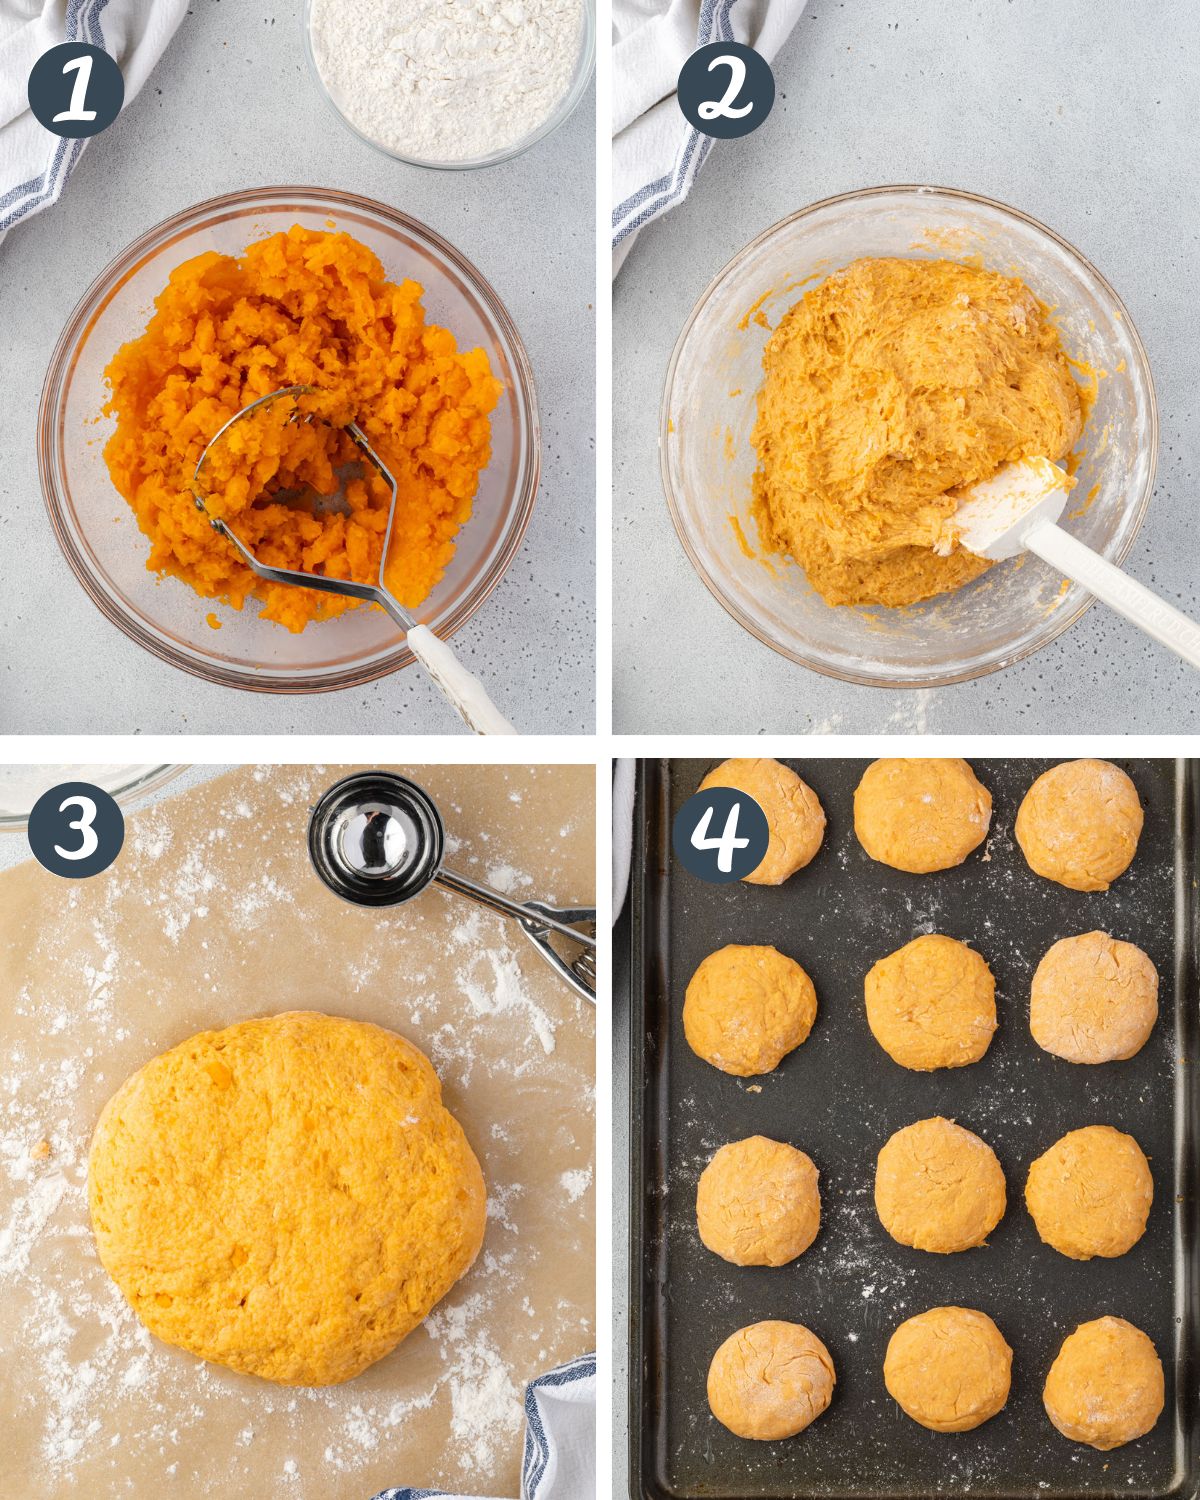 Collage showing the 4 steps to make 2-ingredient sweet potato rolls.